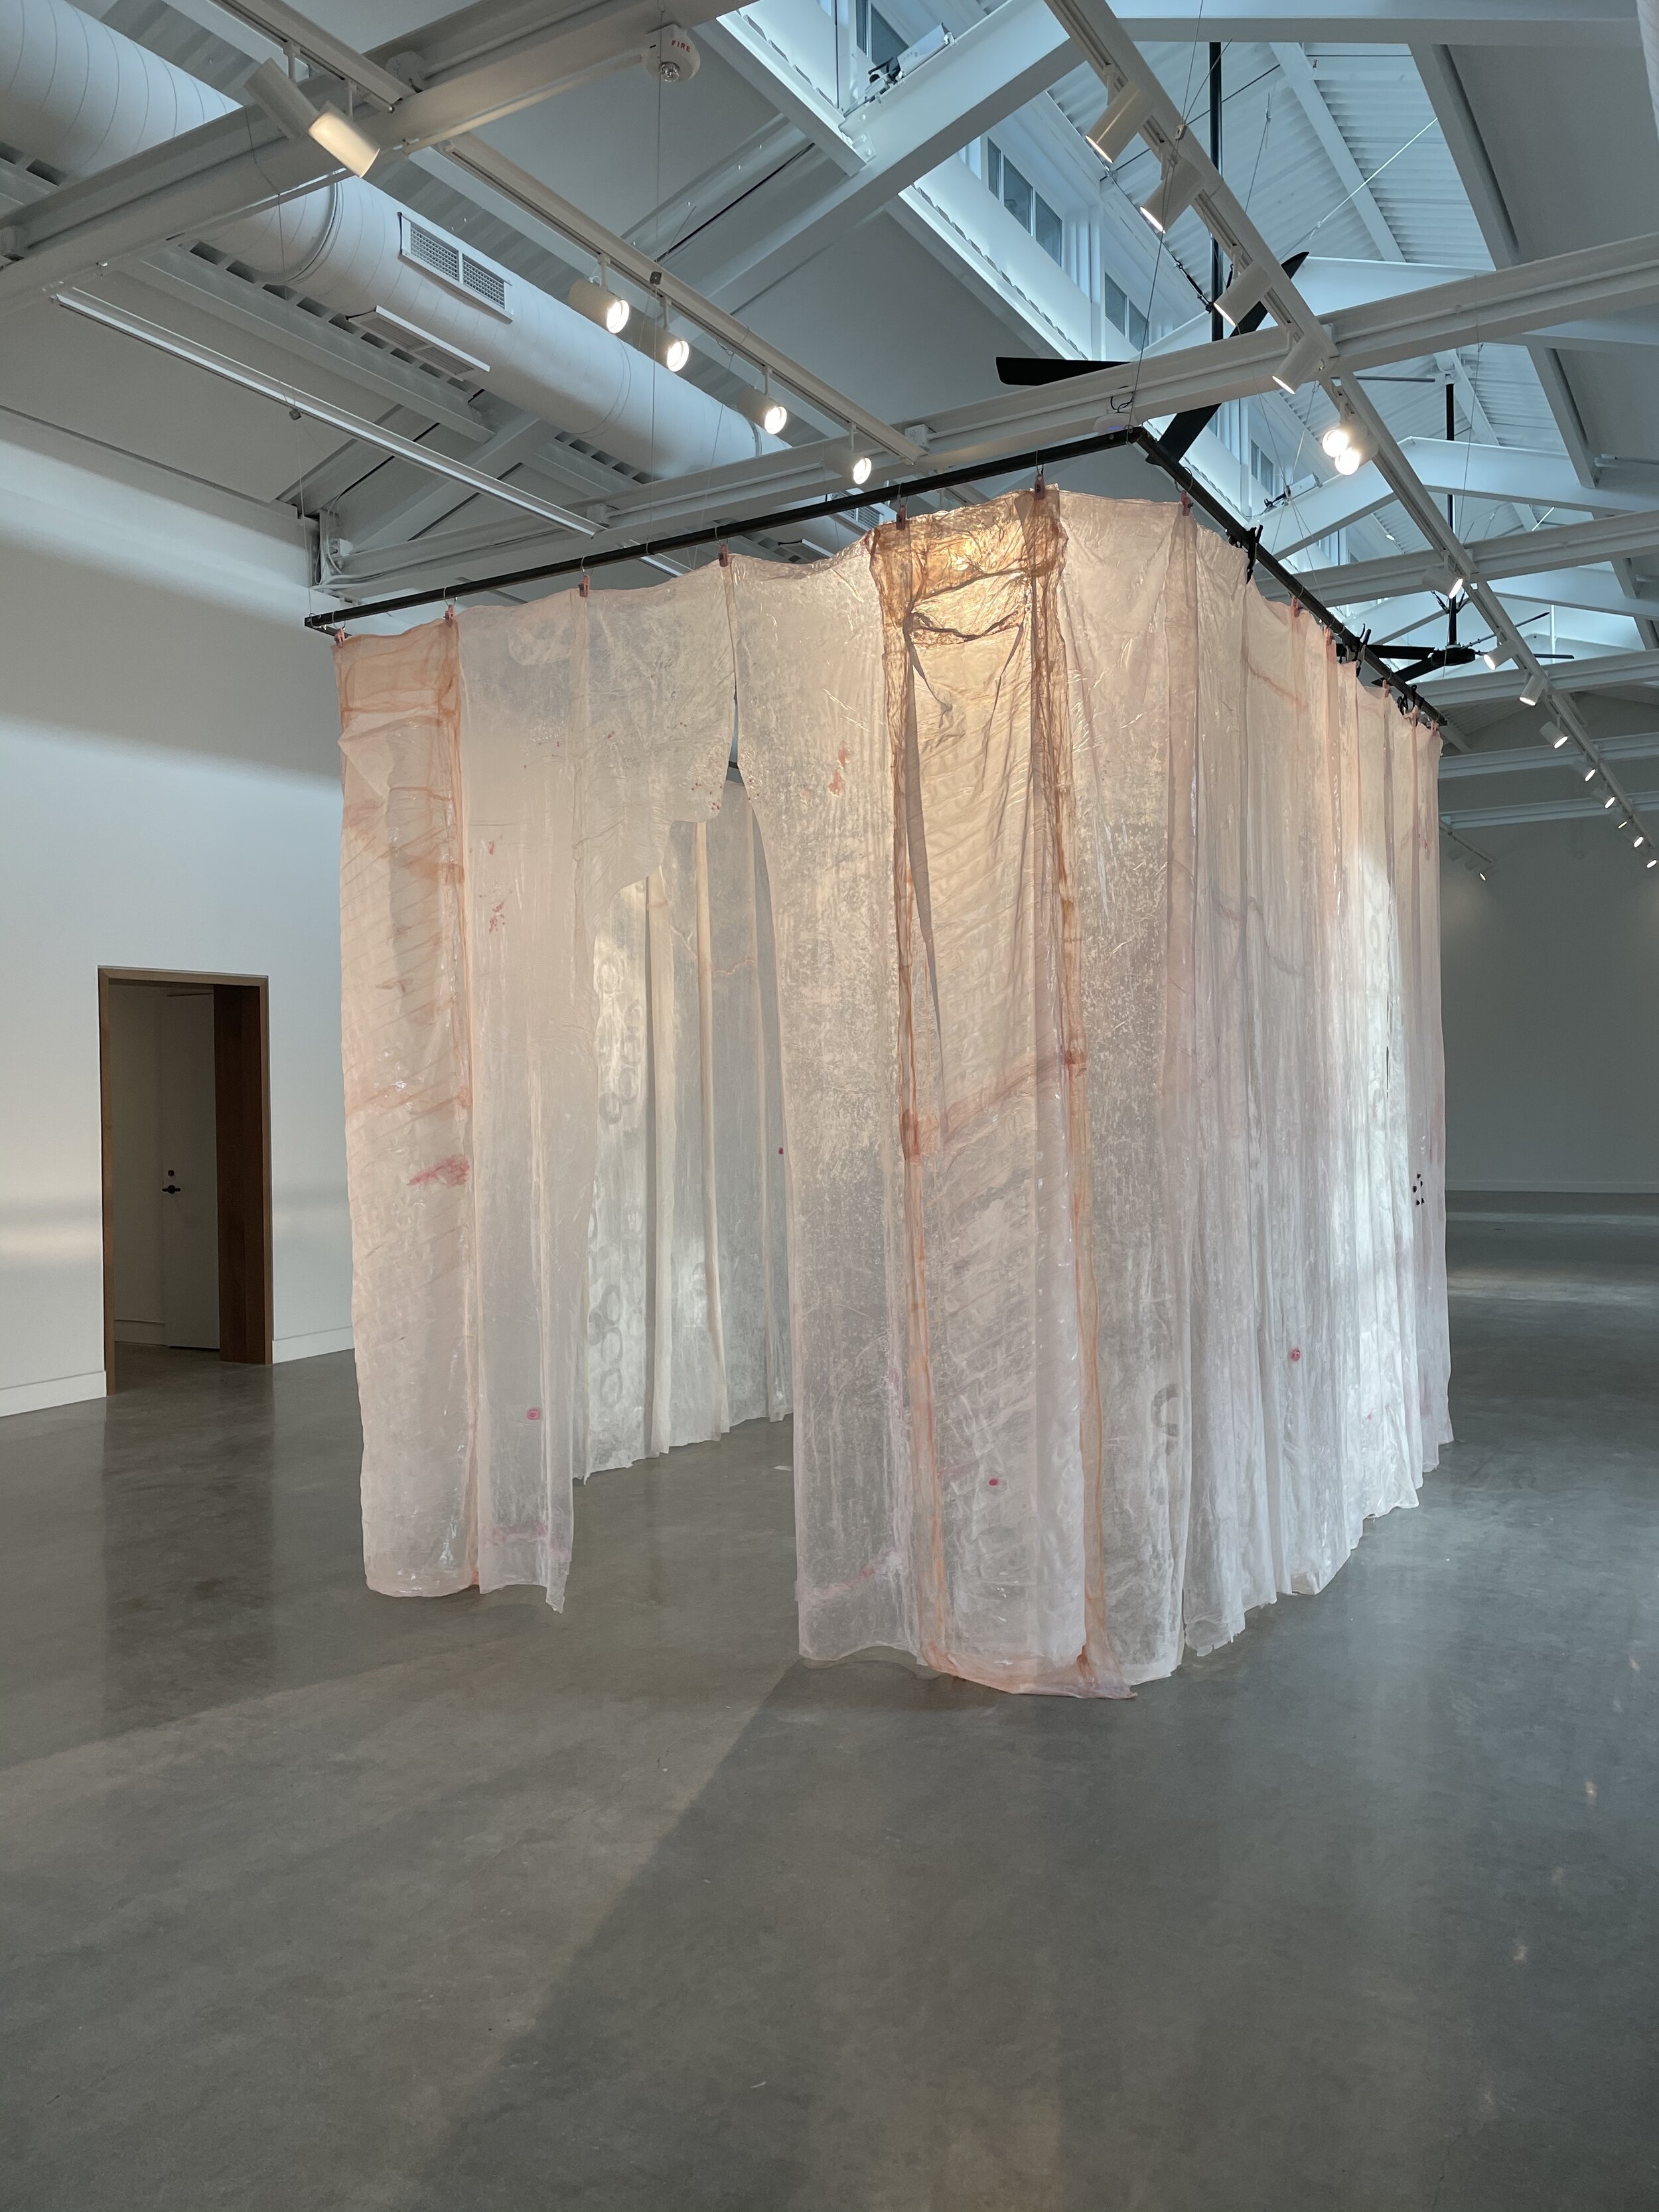  Karinne Smith  Pinky II , 2021  collagen film, flesh clamps, found bees, falsies, silicone, hair ties, baby powder, glass beads, found photograph, tulle dimensions variable to installation Installation view from ArtYard's inaugural exhibition  Girl 